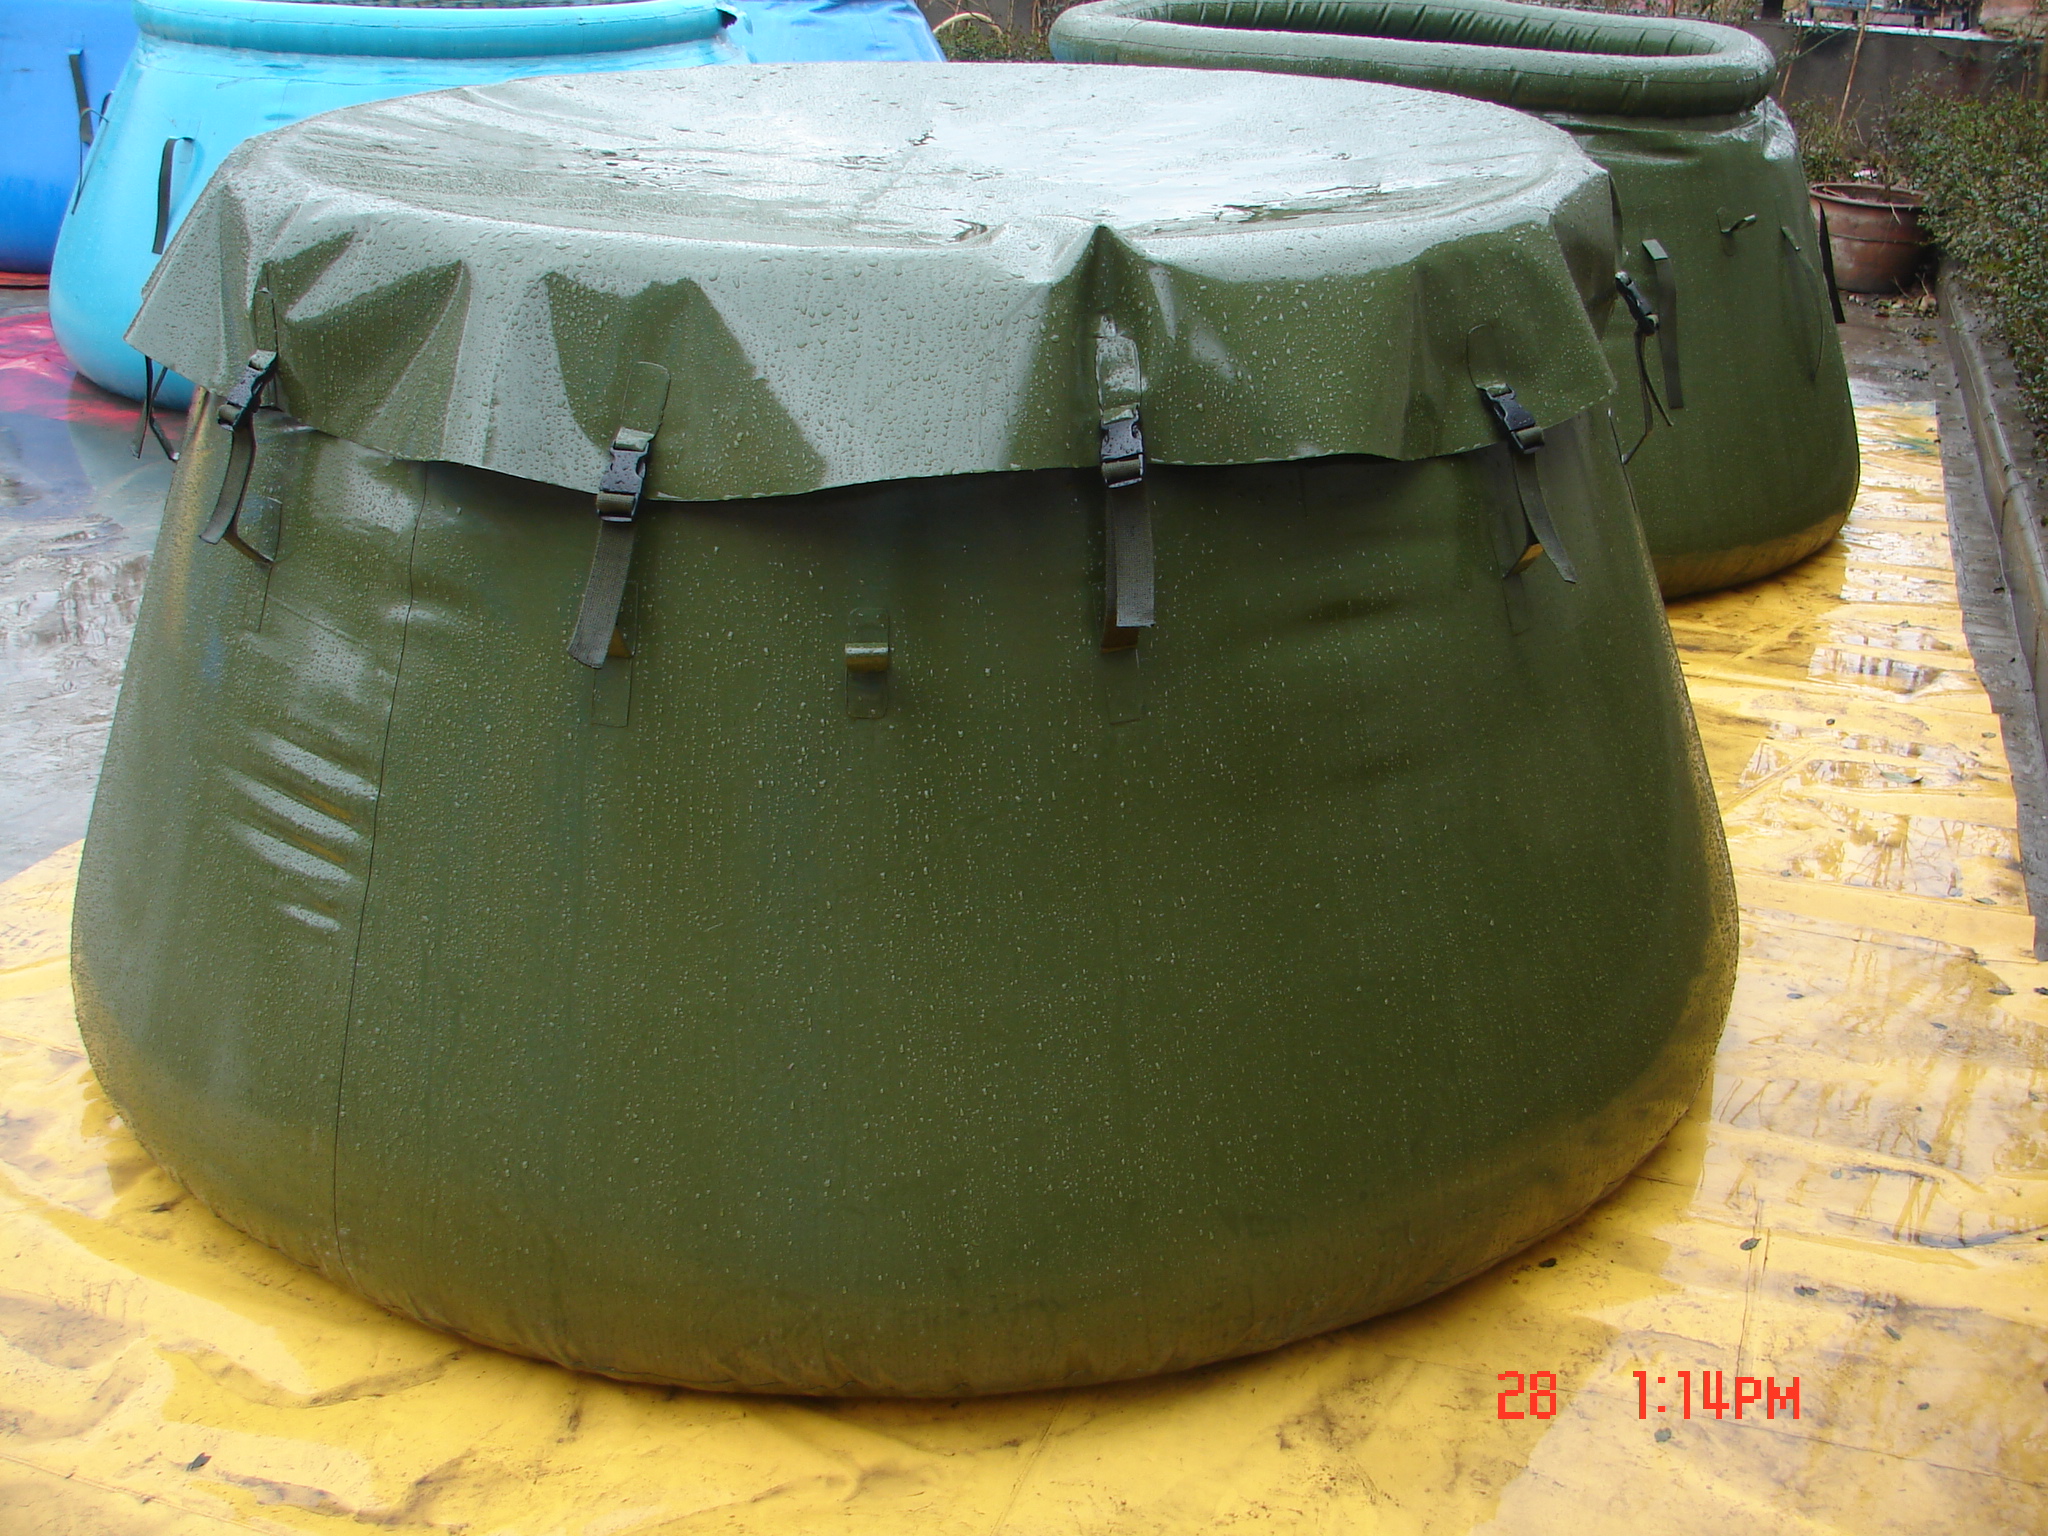 Onion Flexible PVC Made Fire Fighting Water Storage Bag Fire Water Bladder Quotation